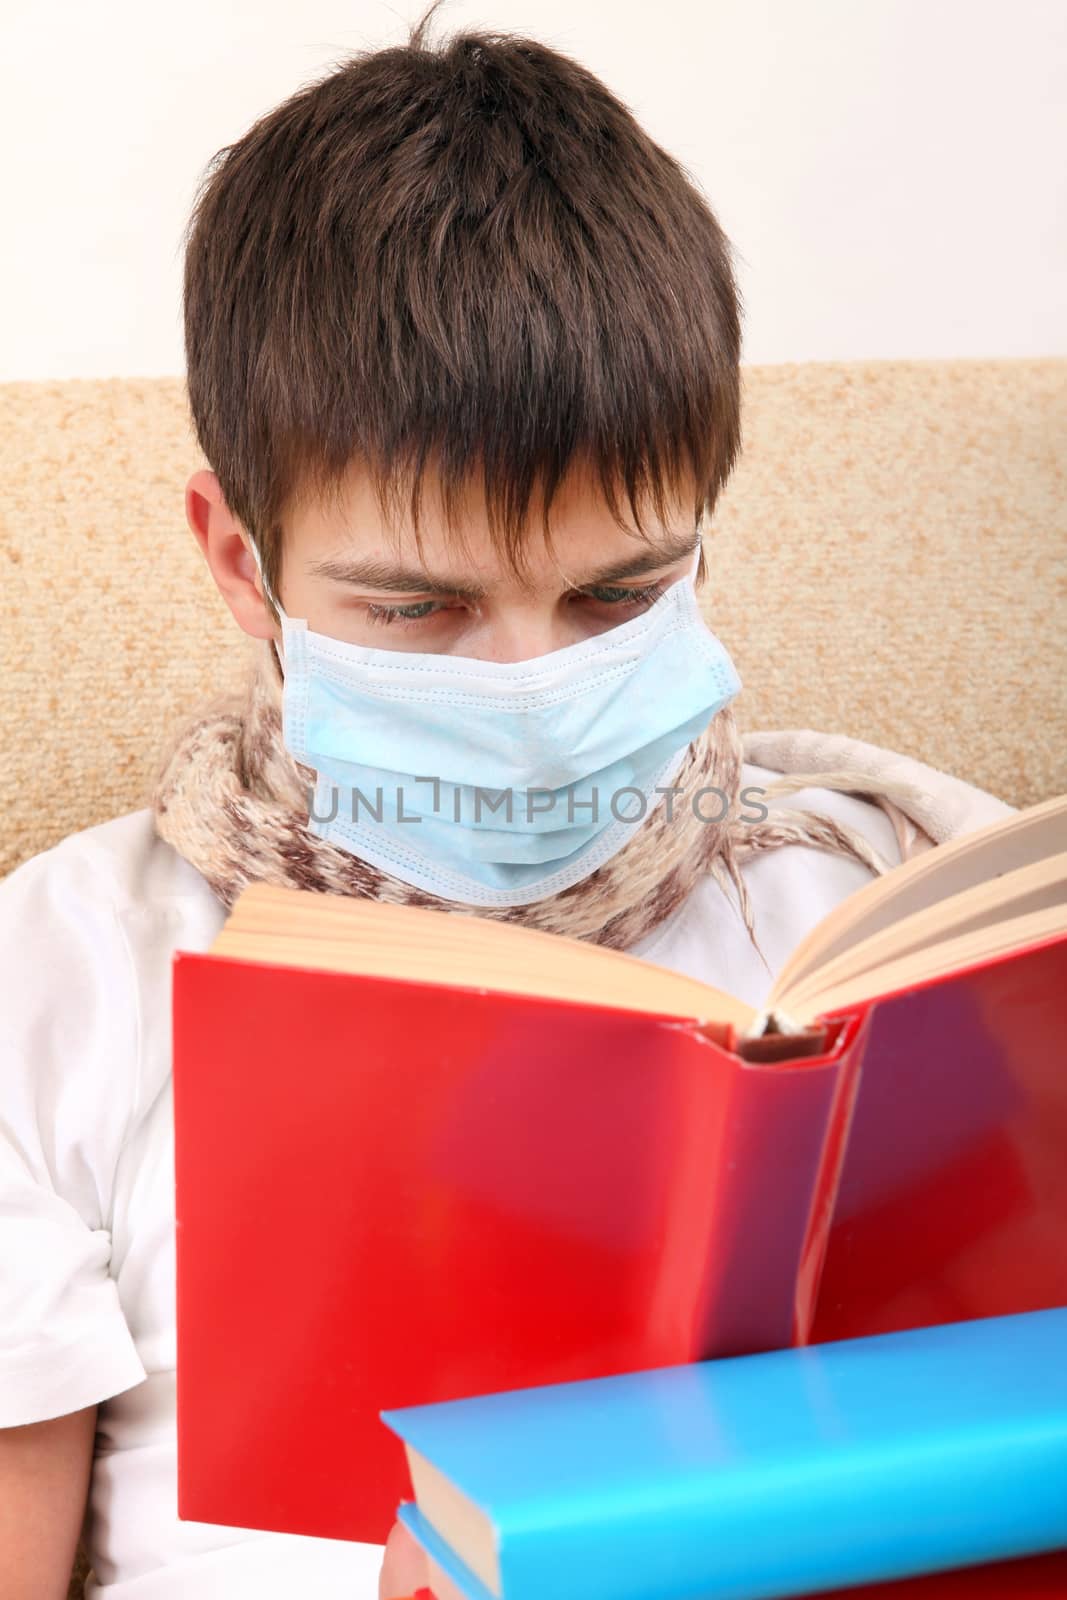 Sick Teenager in Flu Mask with the Books on the Sofa